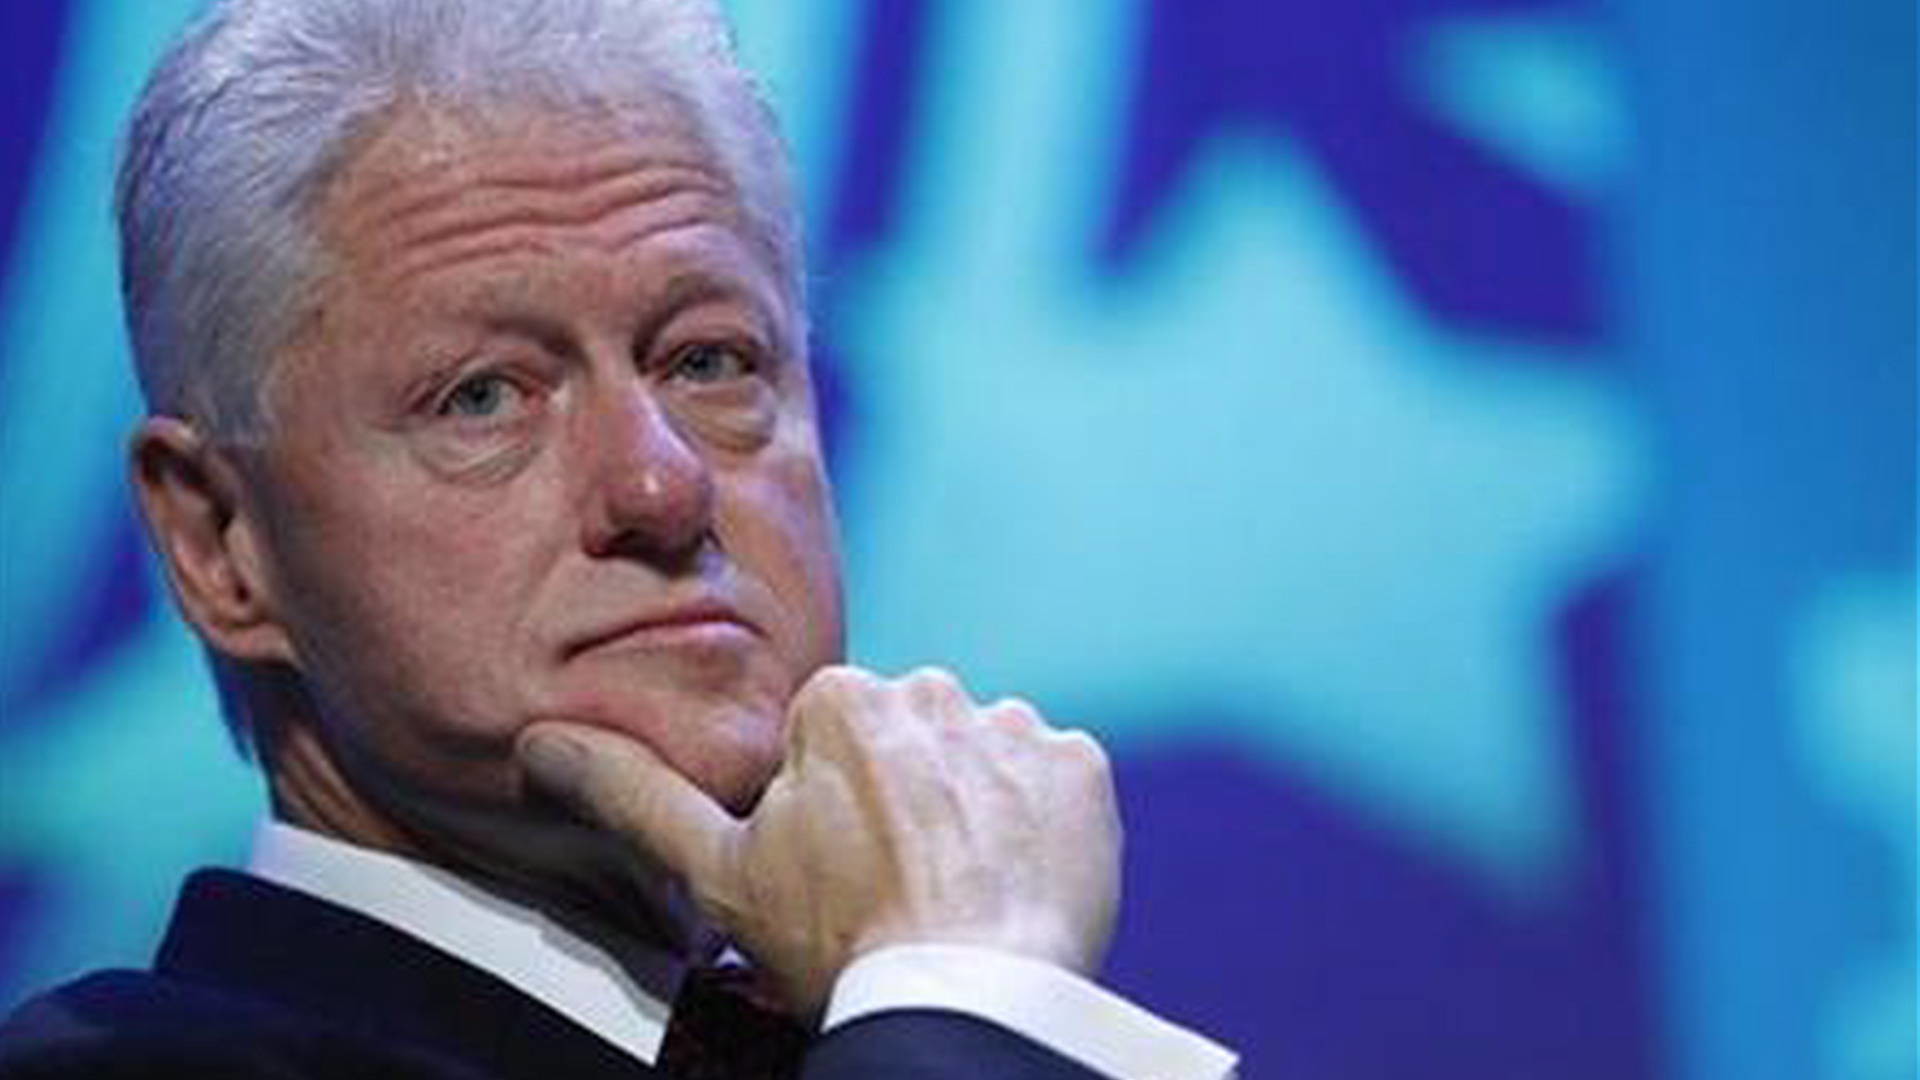 Is It Fair to Raise Rape Harassment Allegations Against Bill Clinton in Hillarys 2016 Campaign Democracy Now